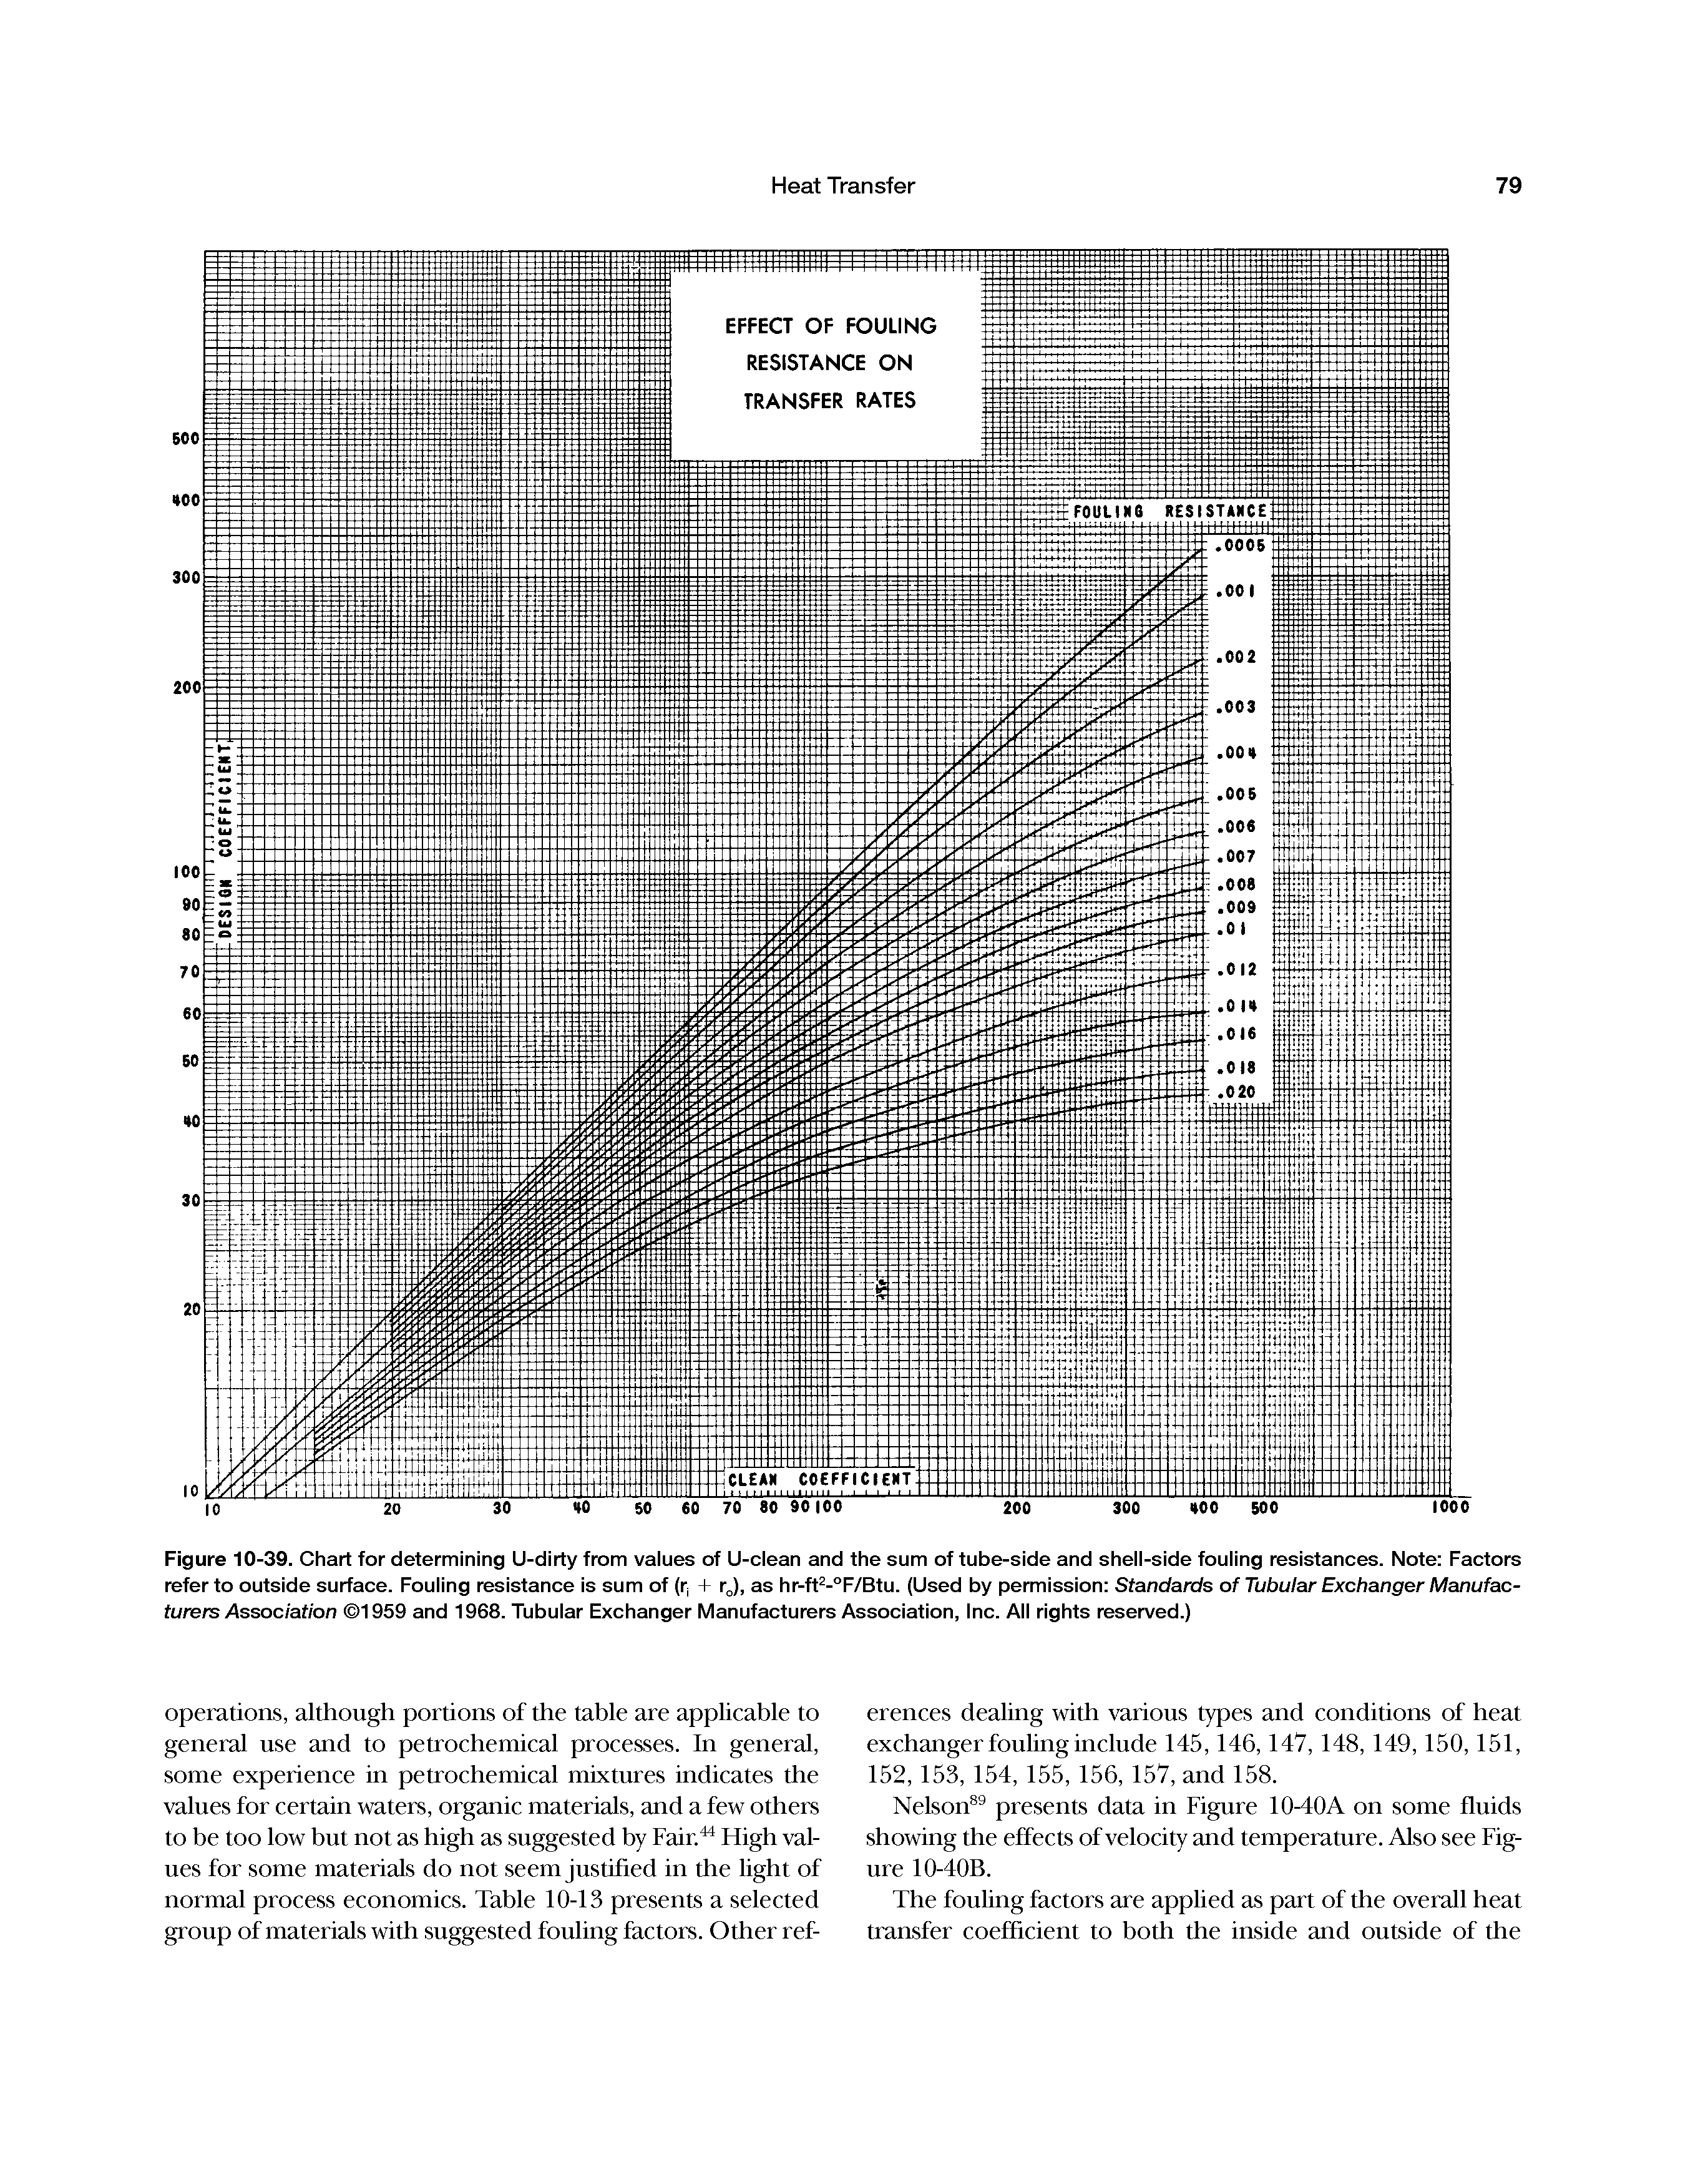 Figure 10-39. Chart for determining U-dirty from values of U-clean and the sum of tube-side and shell-side fouling resistances. Note Factors refer to outside surface. Fouling resistance is sum of (r + rj, as hr-ft -°F/Btu. (Used by permission Standards of Tubular Exchanger Manufacturers Association 1959 and 1968. Tubular Exchanger Manufacturers Association, Inc. All rights reserved.)...